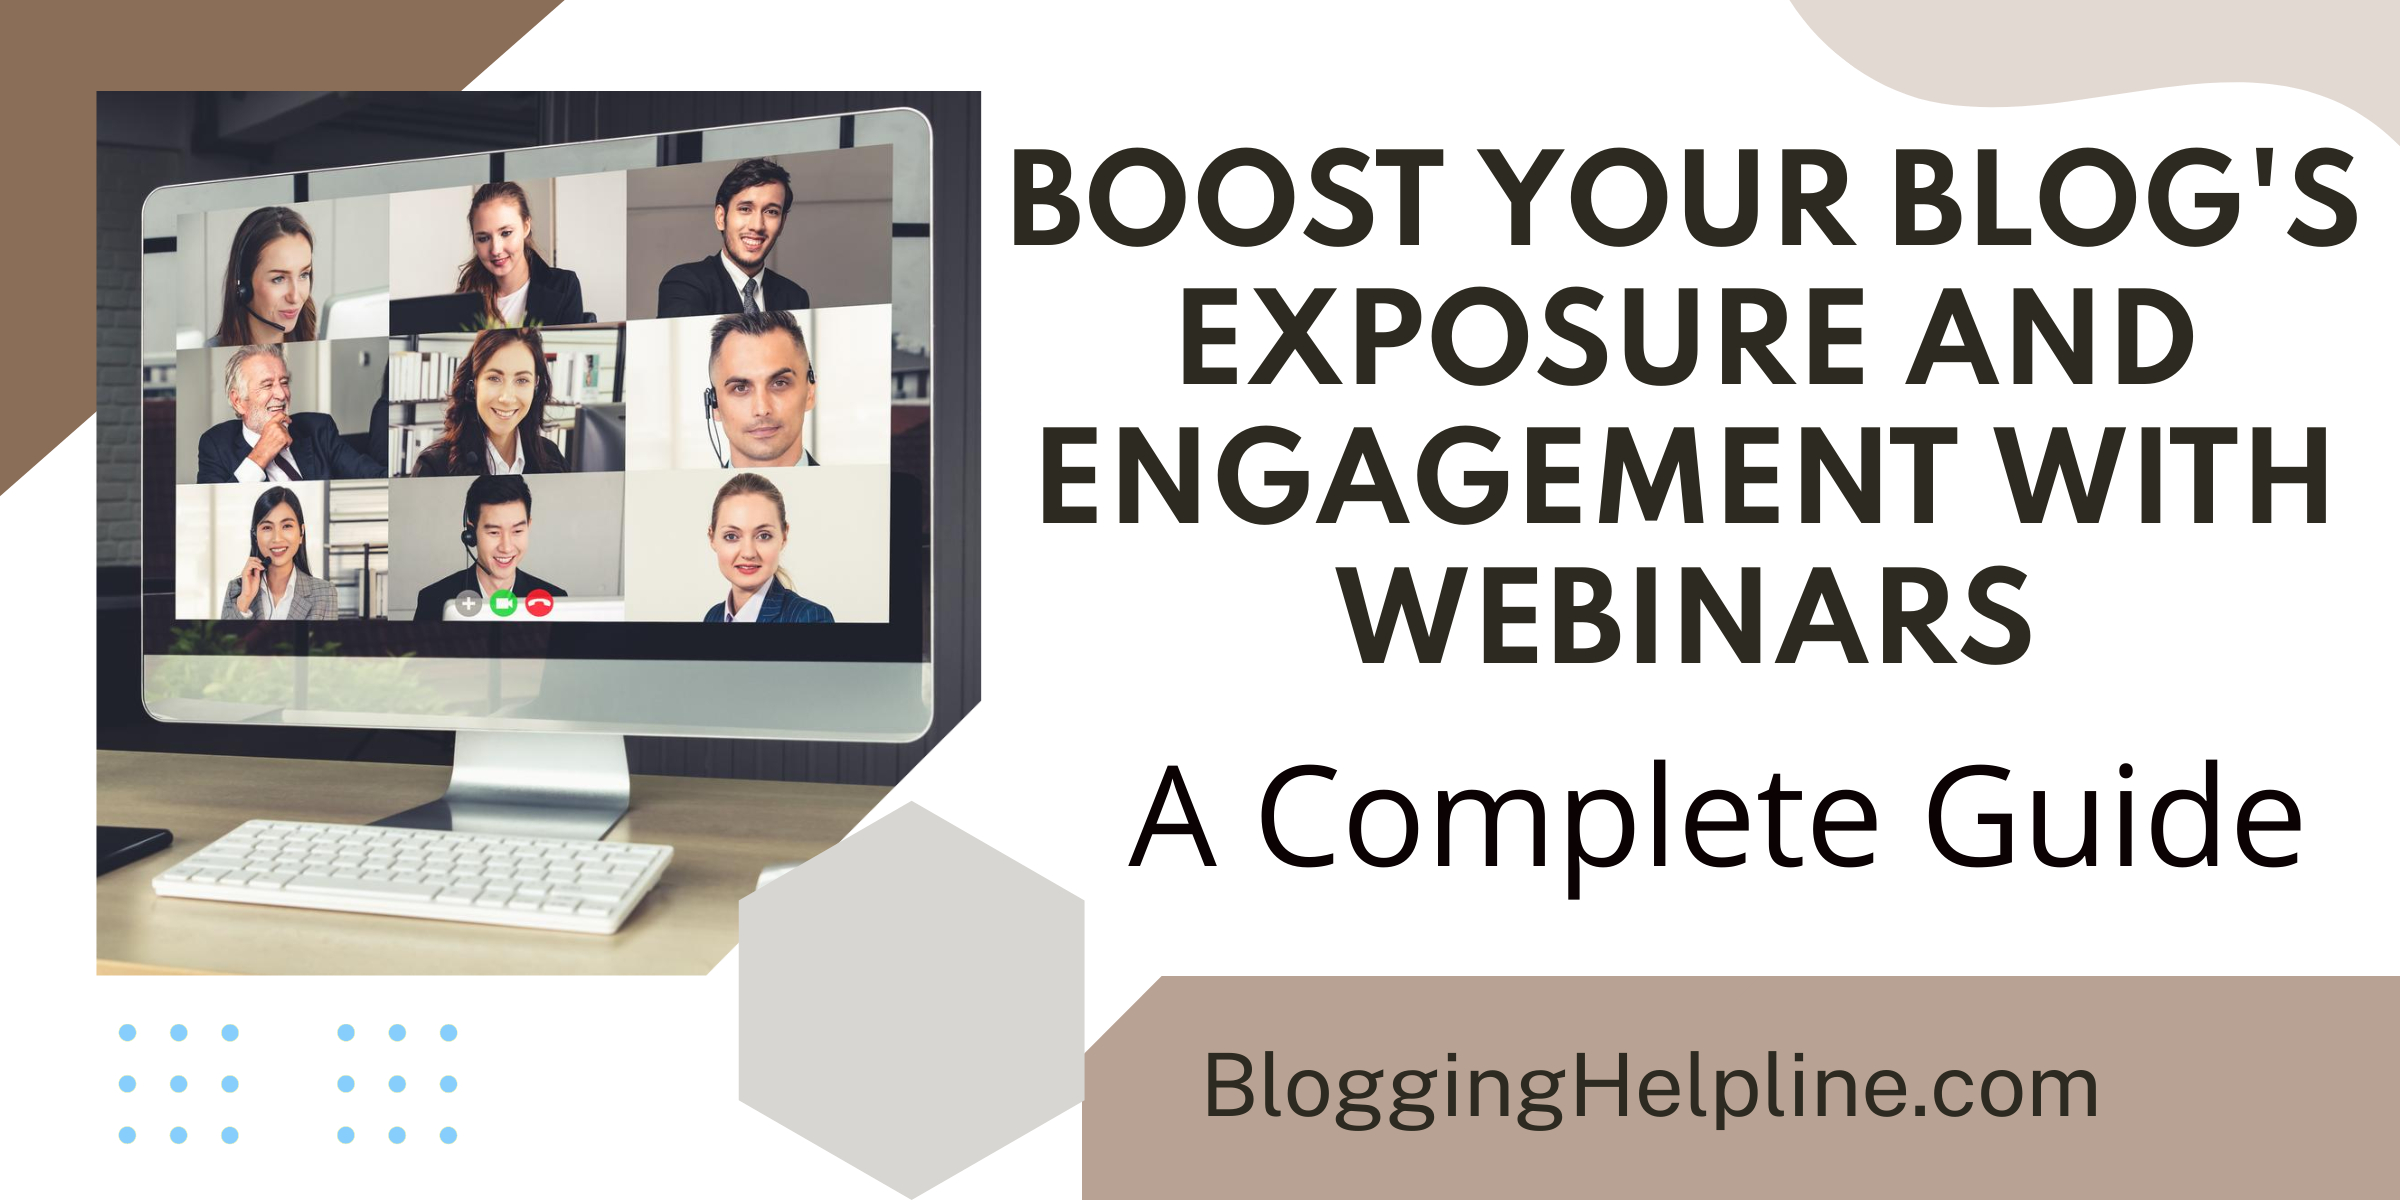 BOOST YOUR BLOG'S EXPOSURE AND ENGAGEMENT WITH WEBINARS